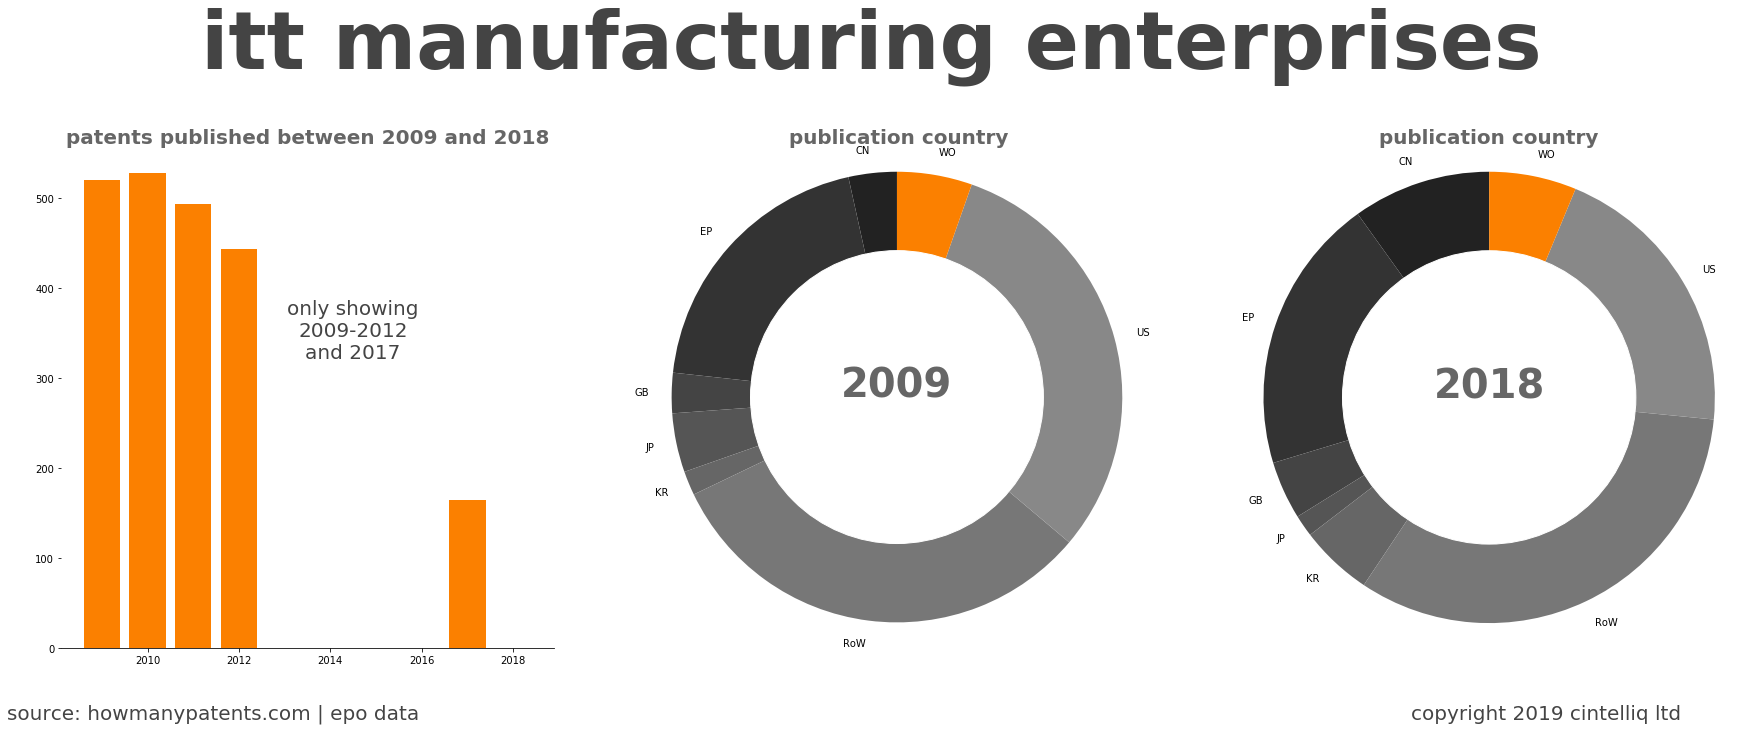 summary of patents for Itt Manufacturing Enterprises